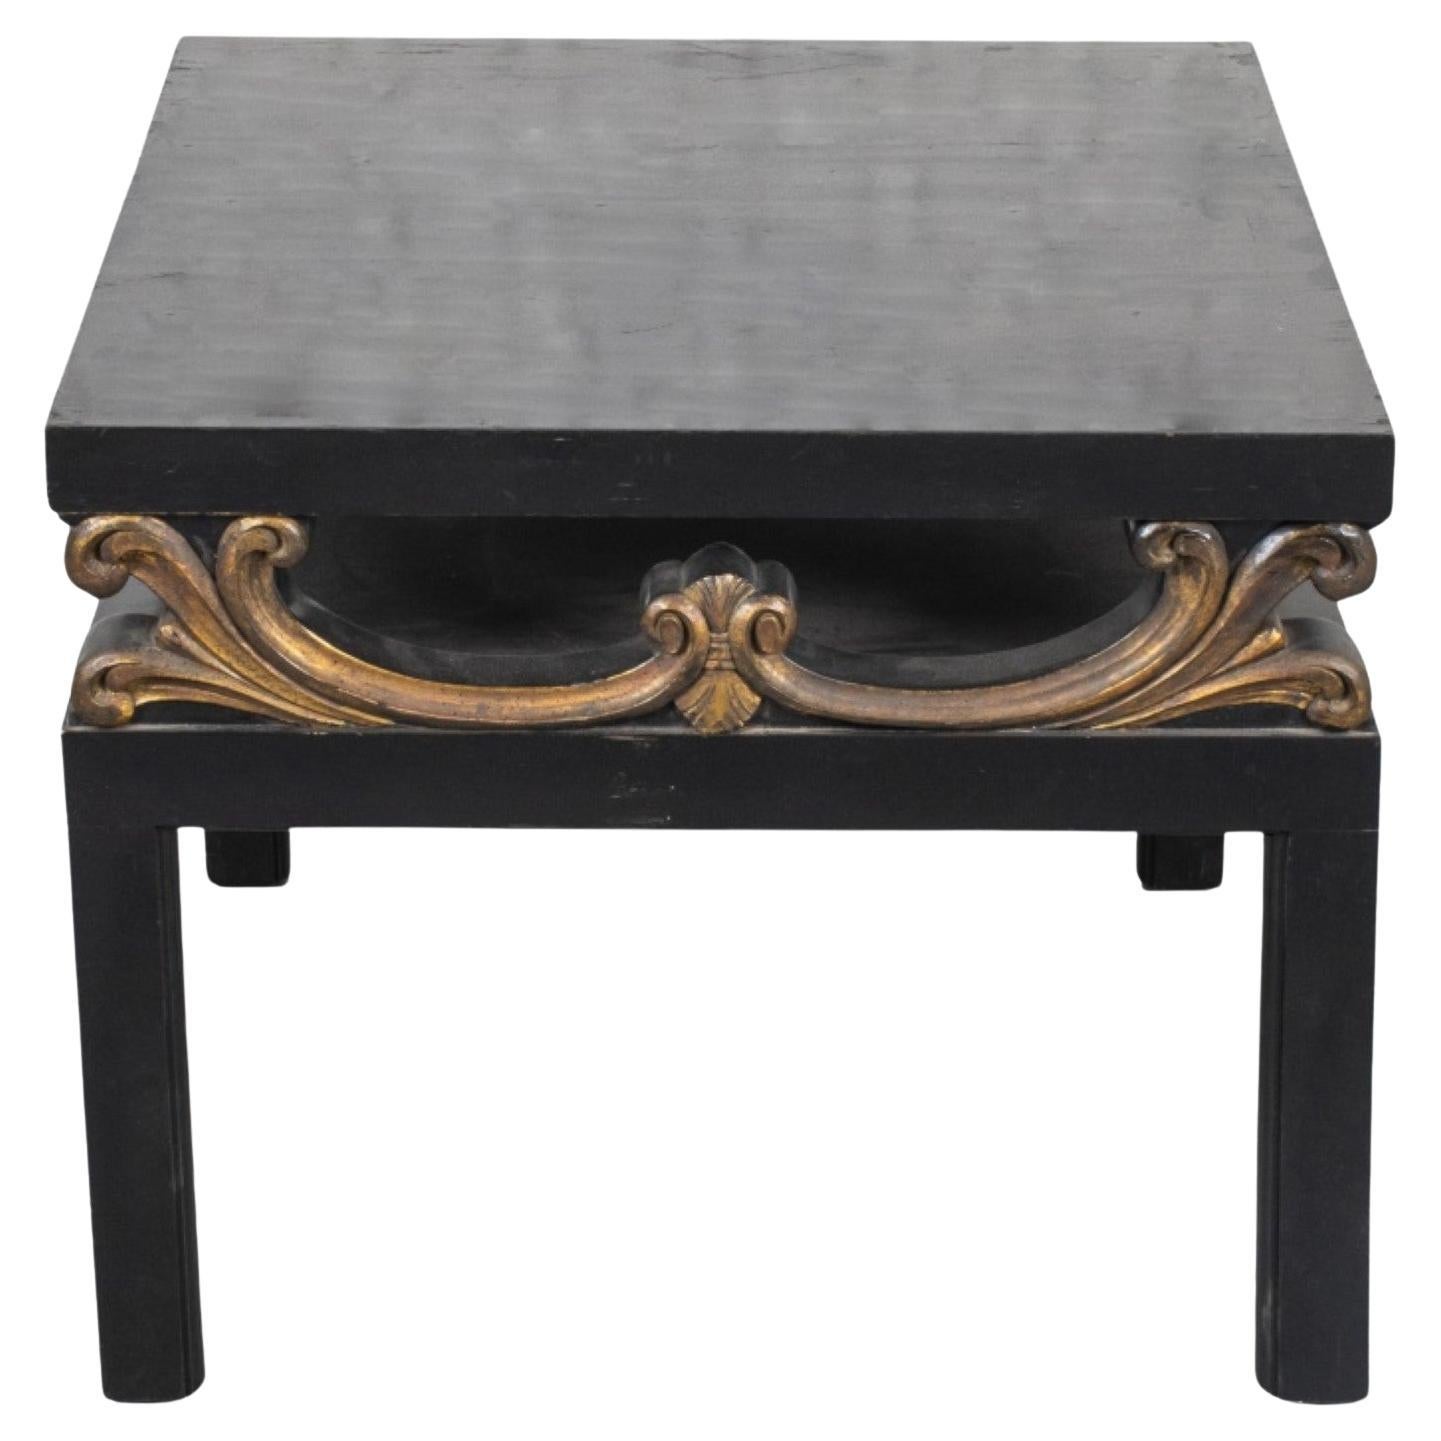 Table d'appoint style Hollywood Regency